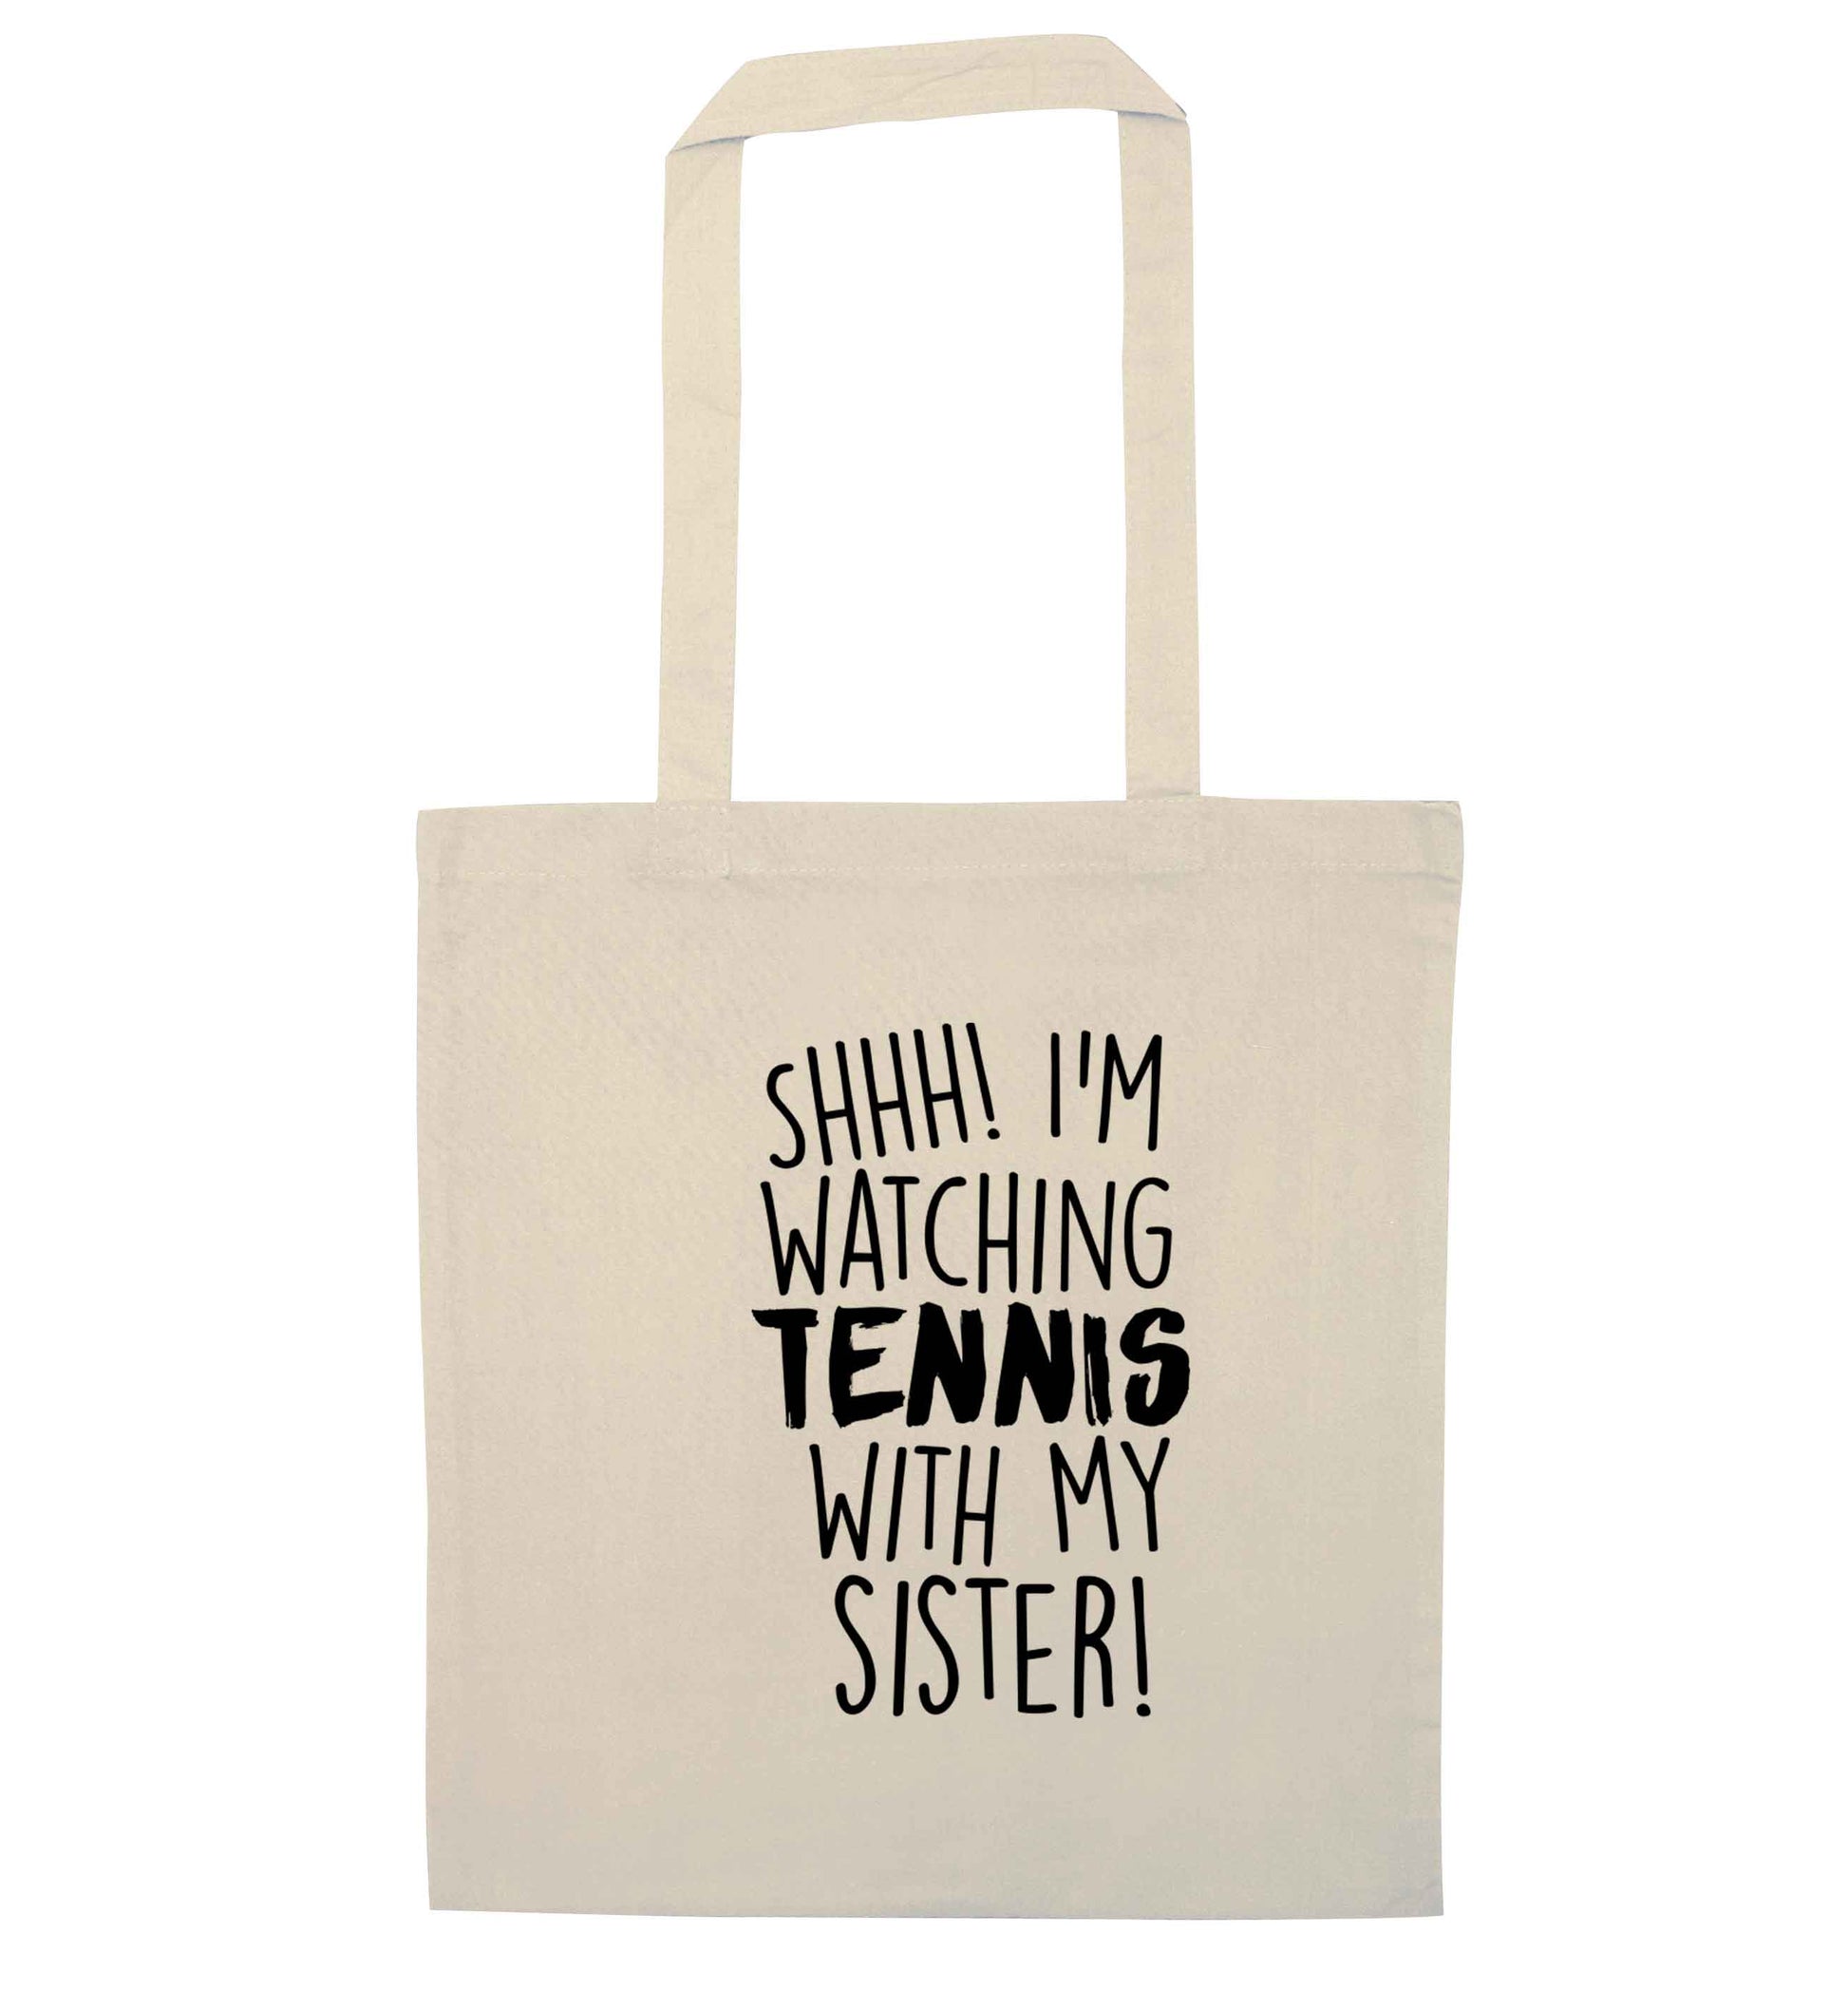 Shh! I'm watching tennis with my sister! natural tote bag